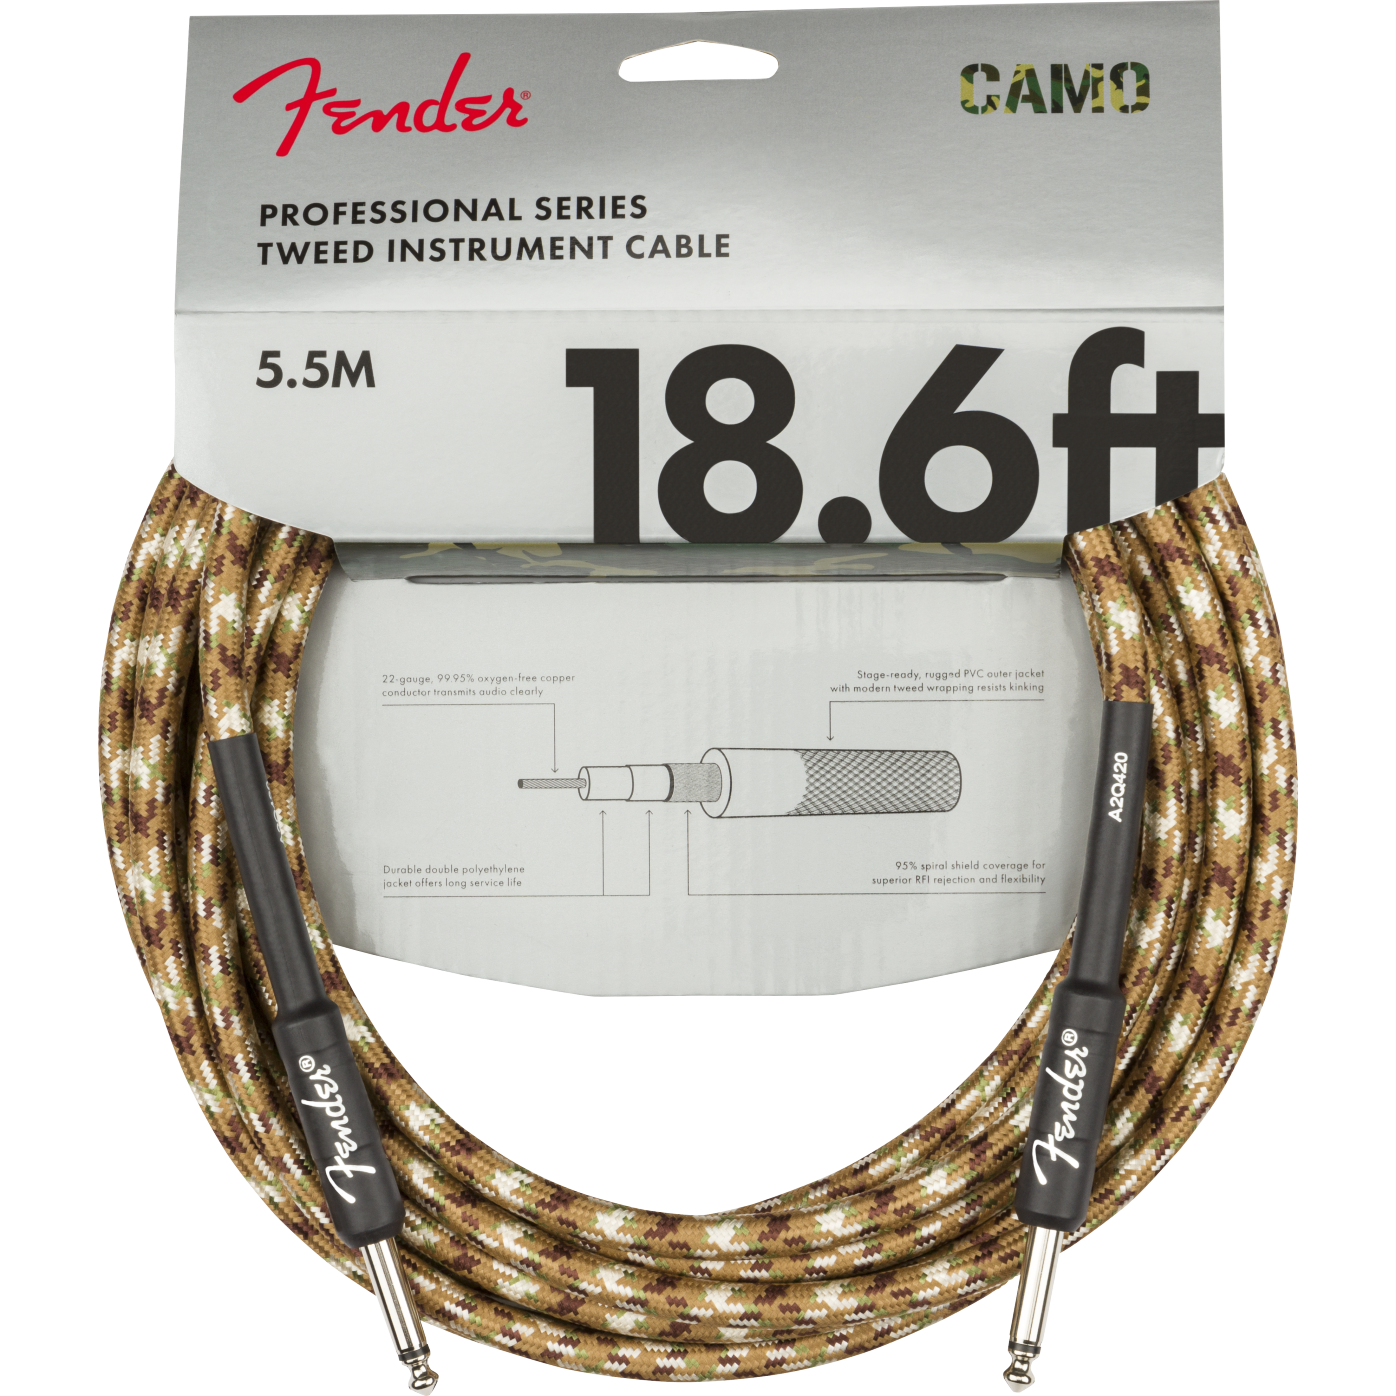 Fender Professional Series Cable, Camo 18.6ft - Bass Centre Music Store Melbourne